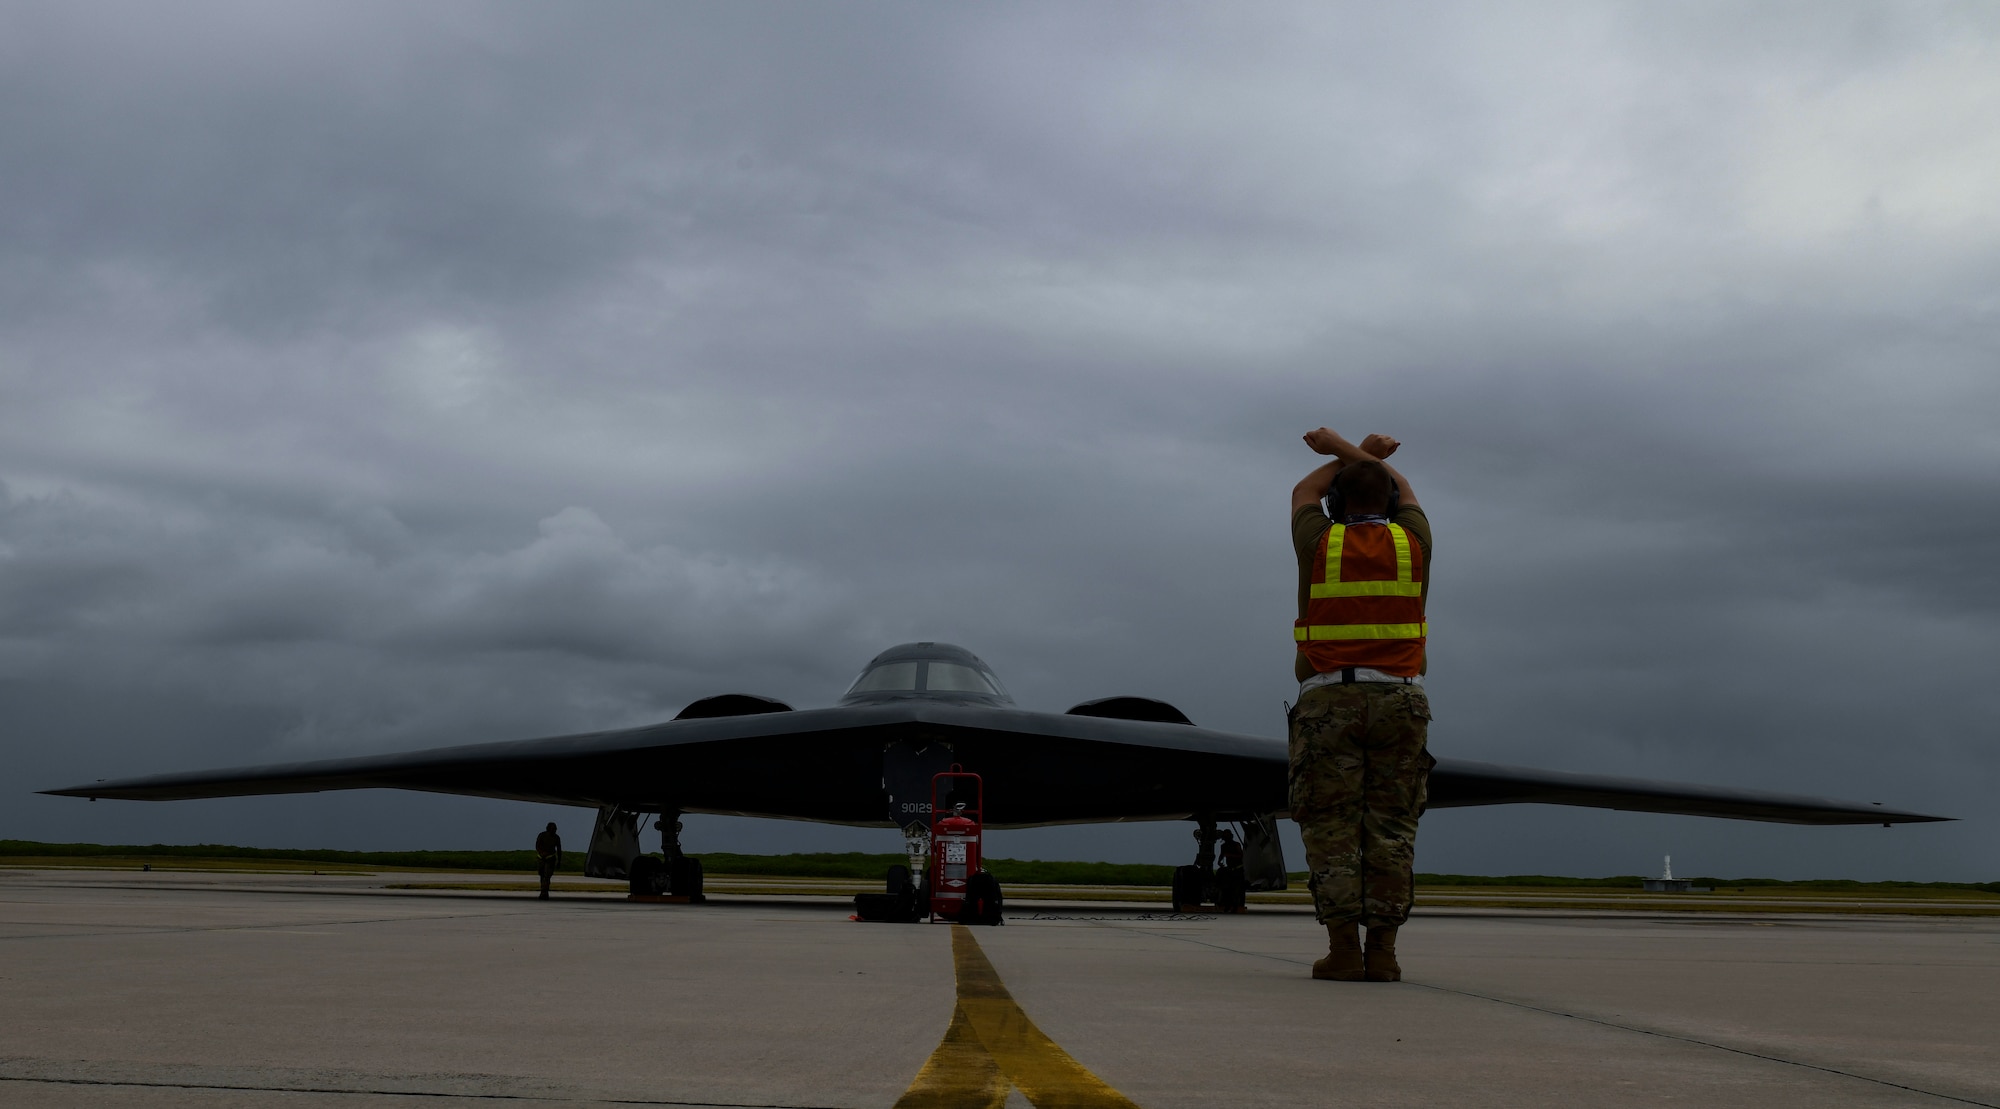 Staff Sgt. Mark Farrar, 131st Aircraft Maintenance Squadron crew chief stationed at Whiteman Air Force Base, Missouri, marshalls a B-2 Spirit Stealth Bomber as it arrives at Naval Support Facility Diego Garcia, Aug. 12, 2020. Three B-2 Spirits from Whiteman AFB deployed to NSF Diego Garcia to support U.S. security commitments in the Indo-Pacific region. (U.S. Air Force photo by Tech. Sgt. Heather Salazar)